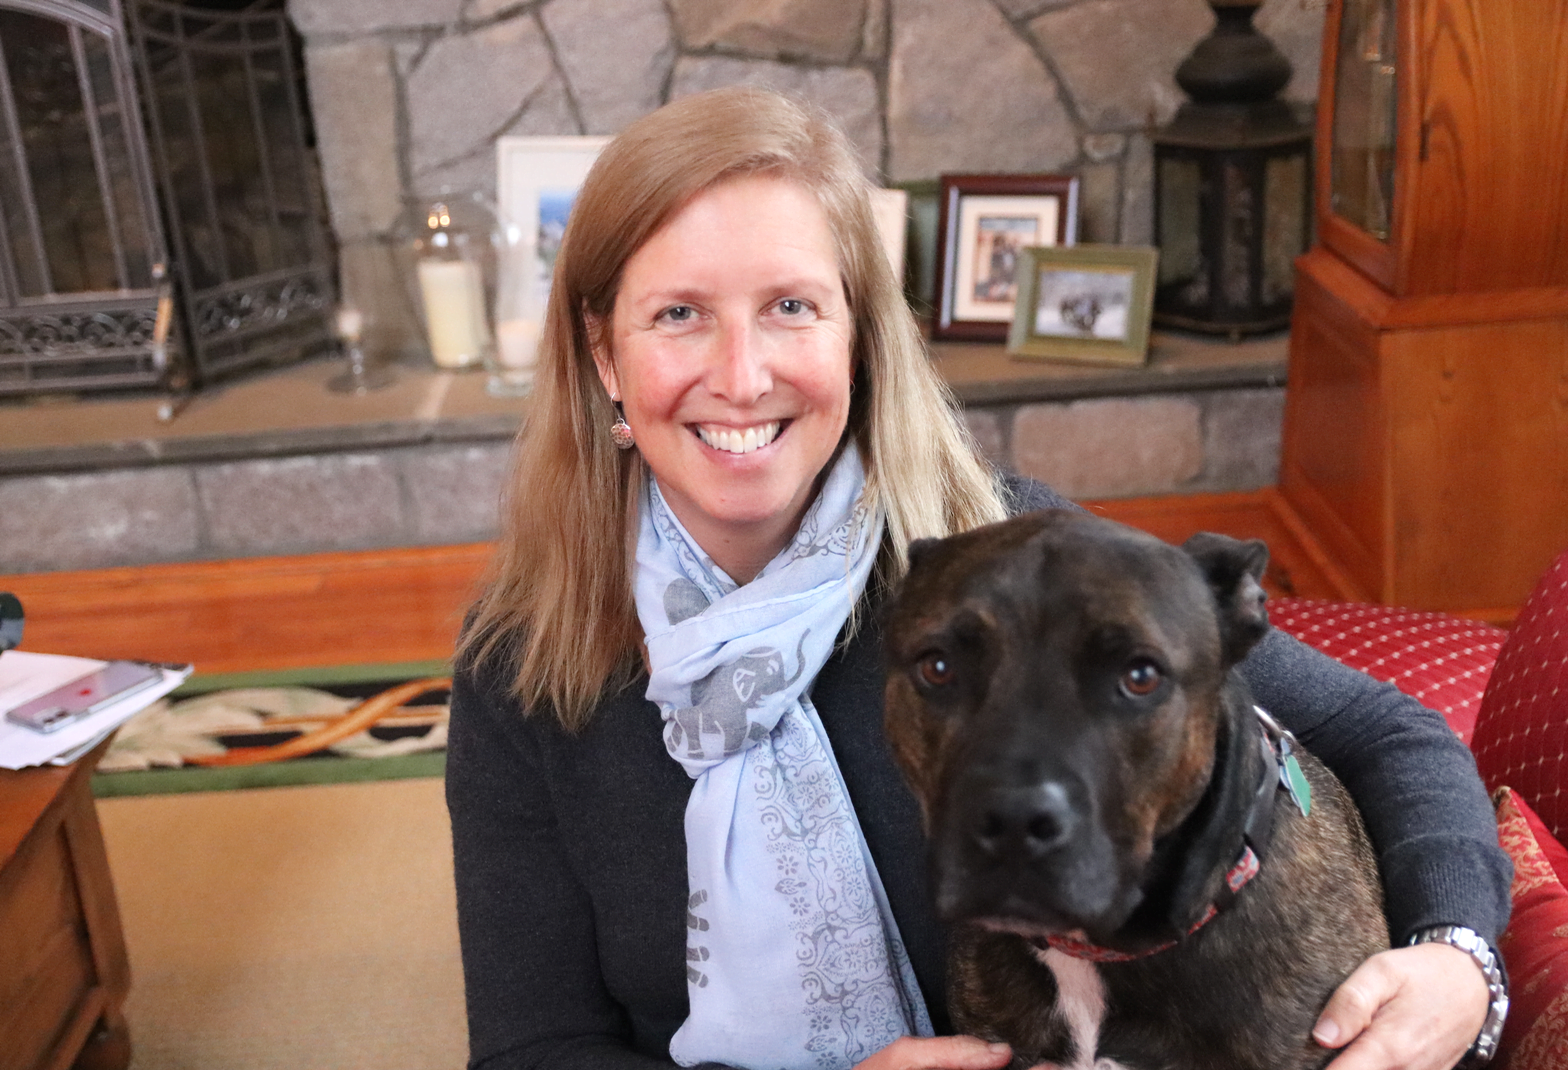 Cheryl Moss and her rescue dog Dobby, named after the character in Harry Potter. Dec 13, 2019 Photo: Leslie Yager